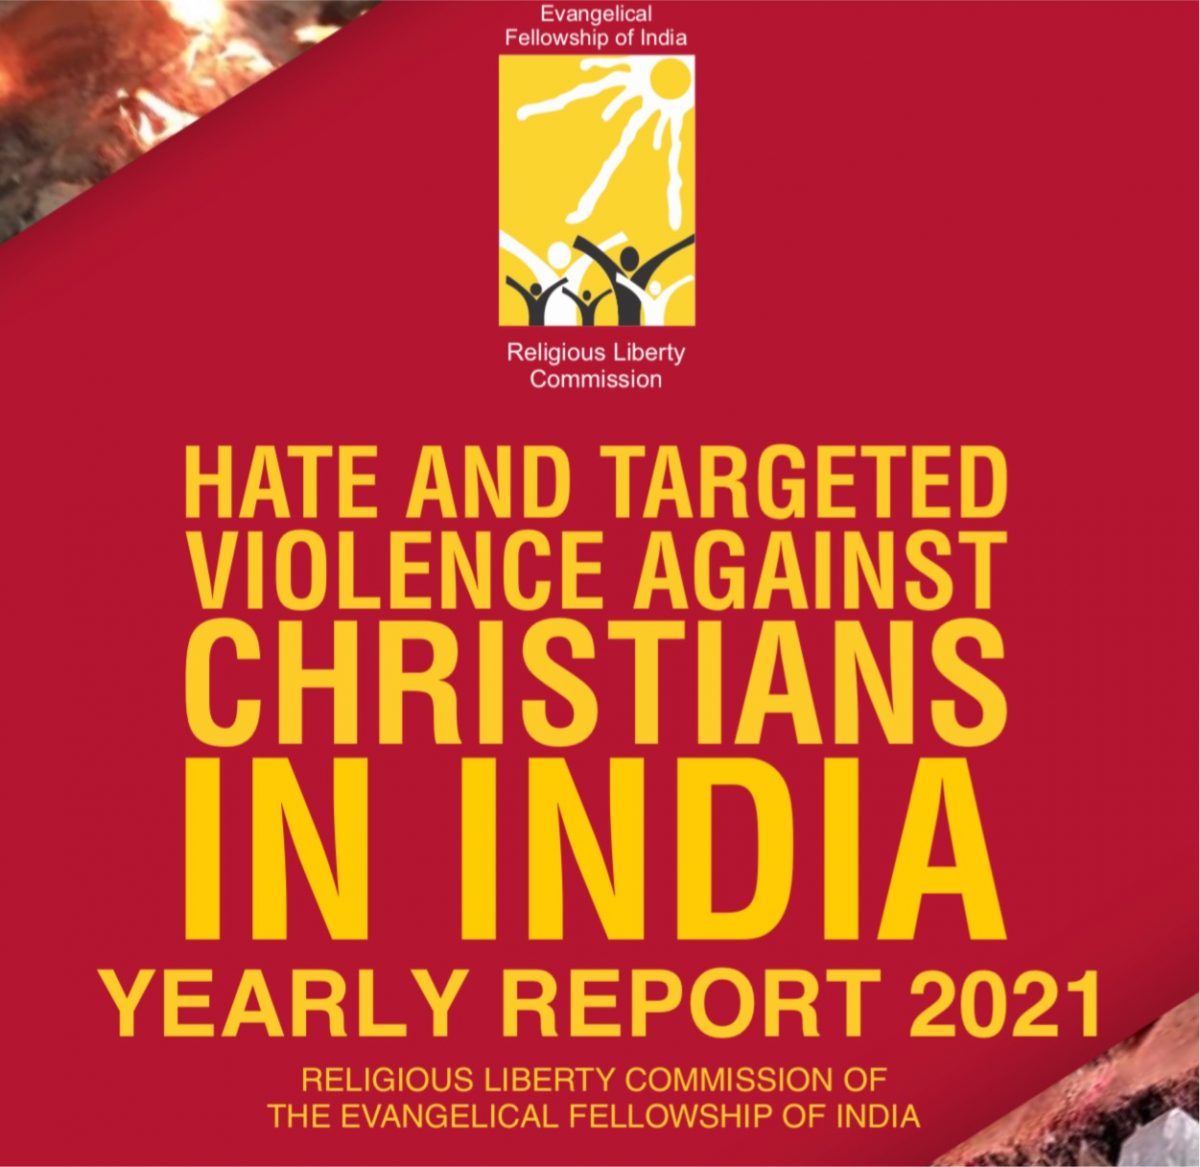 INDIA: New report calls anti-conversion laws “justification for persecution”